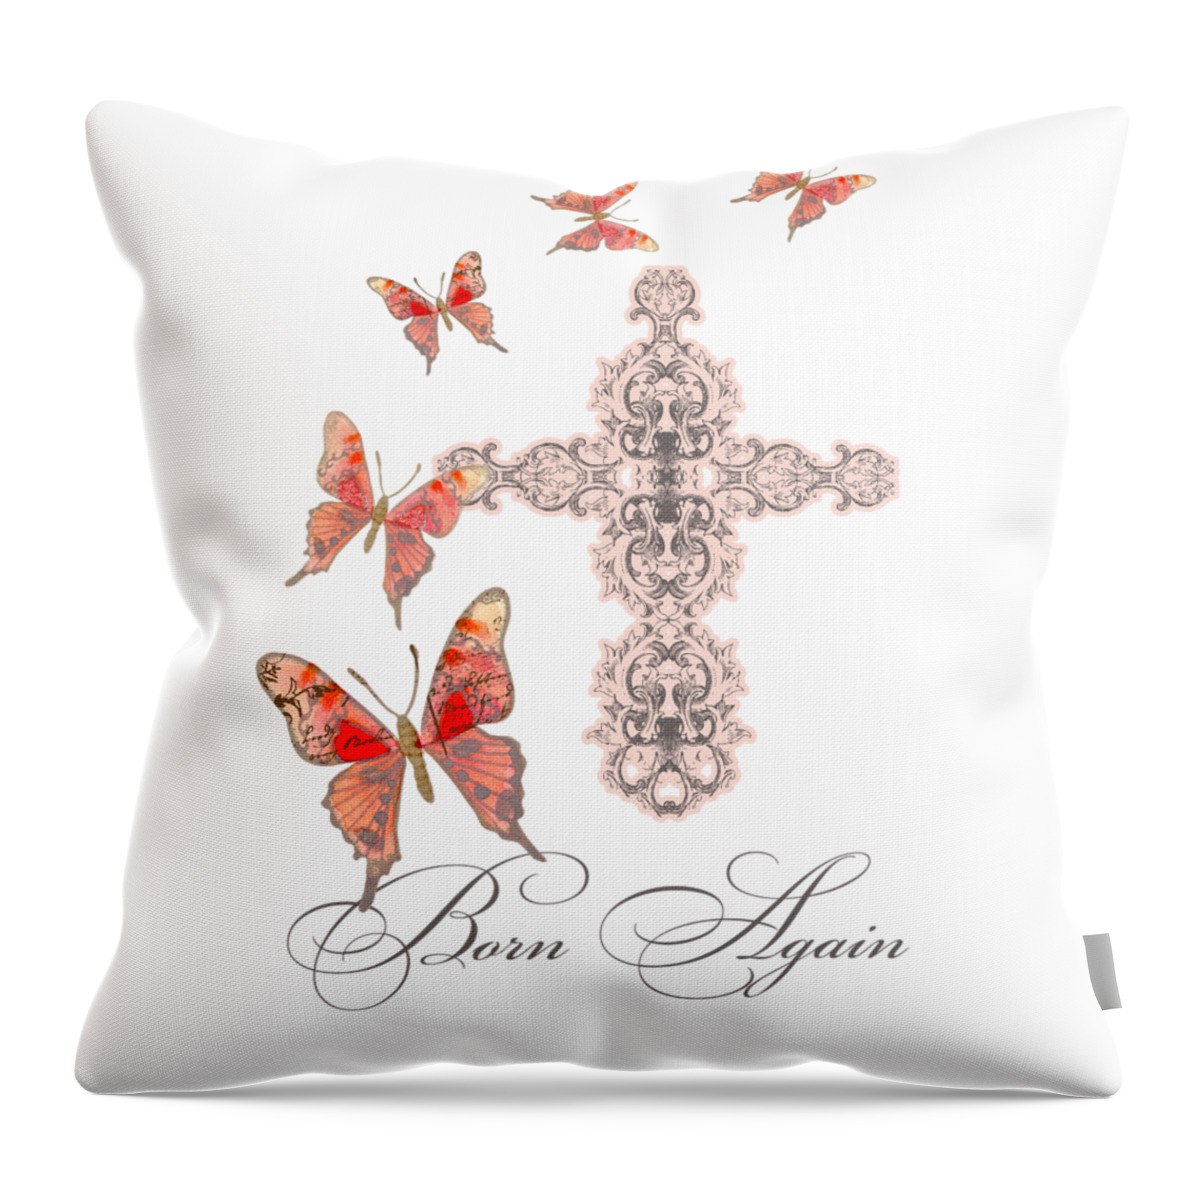 Butterfly Throw Pillow featuring the painting Cross Born Again Christian Inspirational Butterfly Butterflies by Audrey Jeanne Roberts